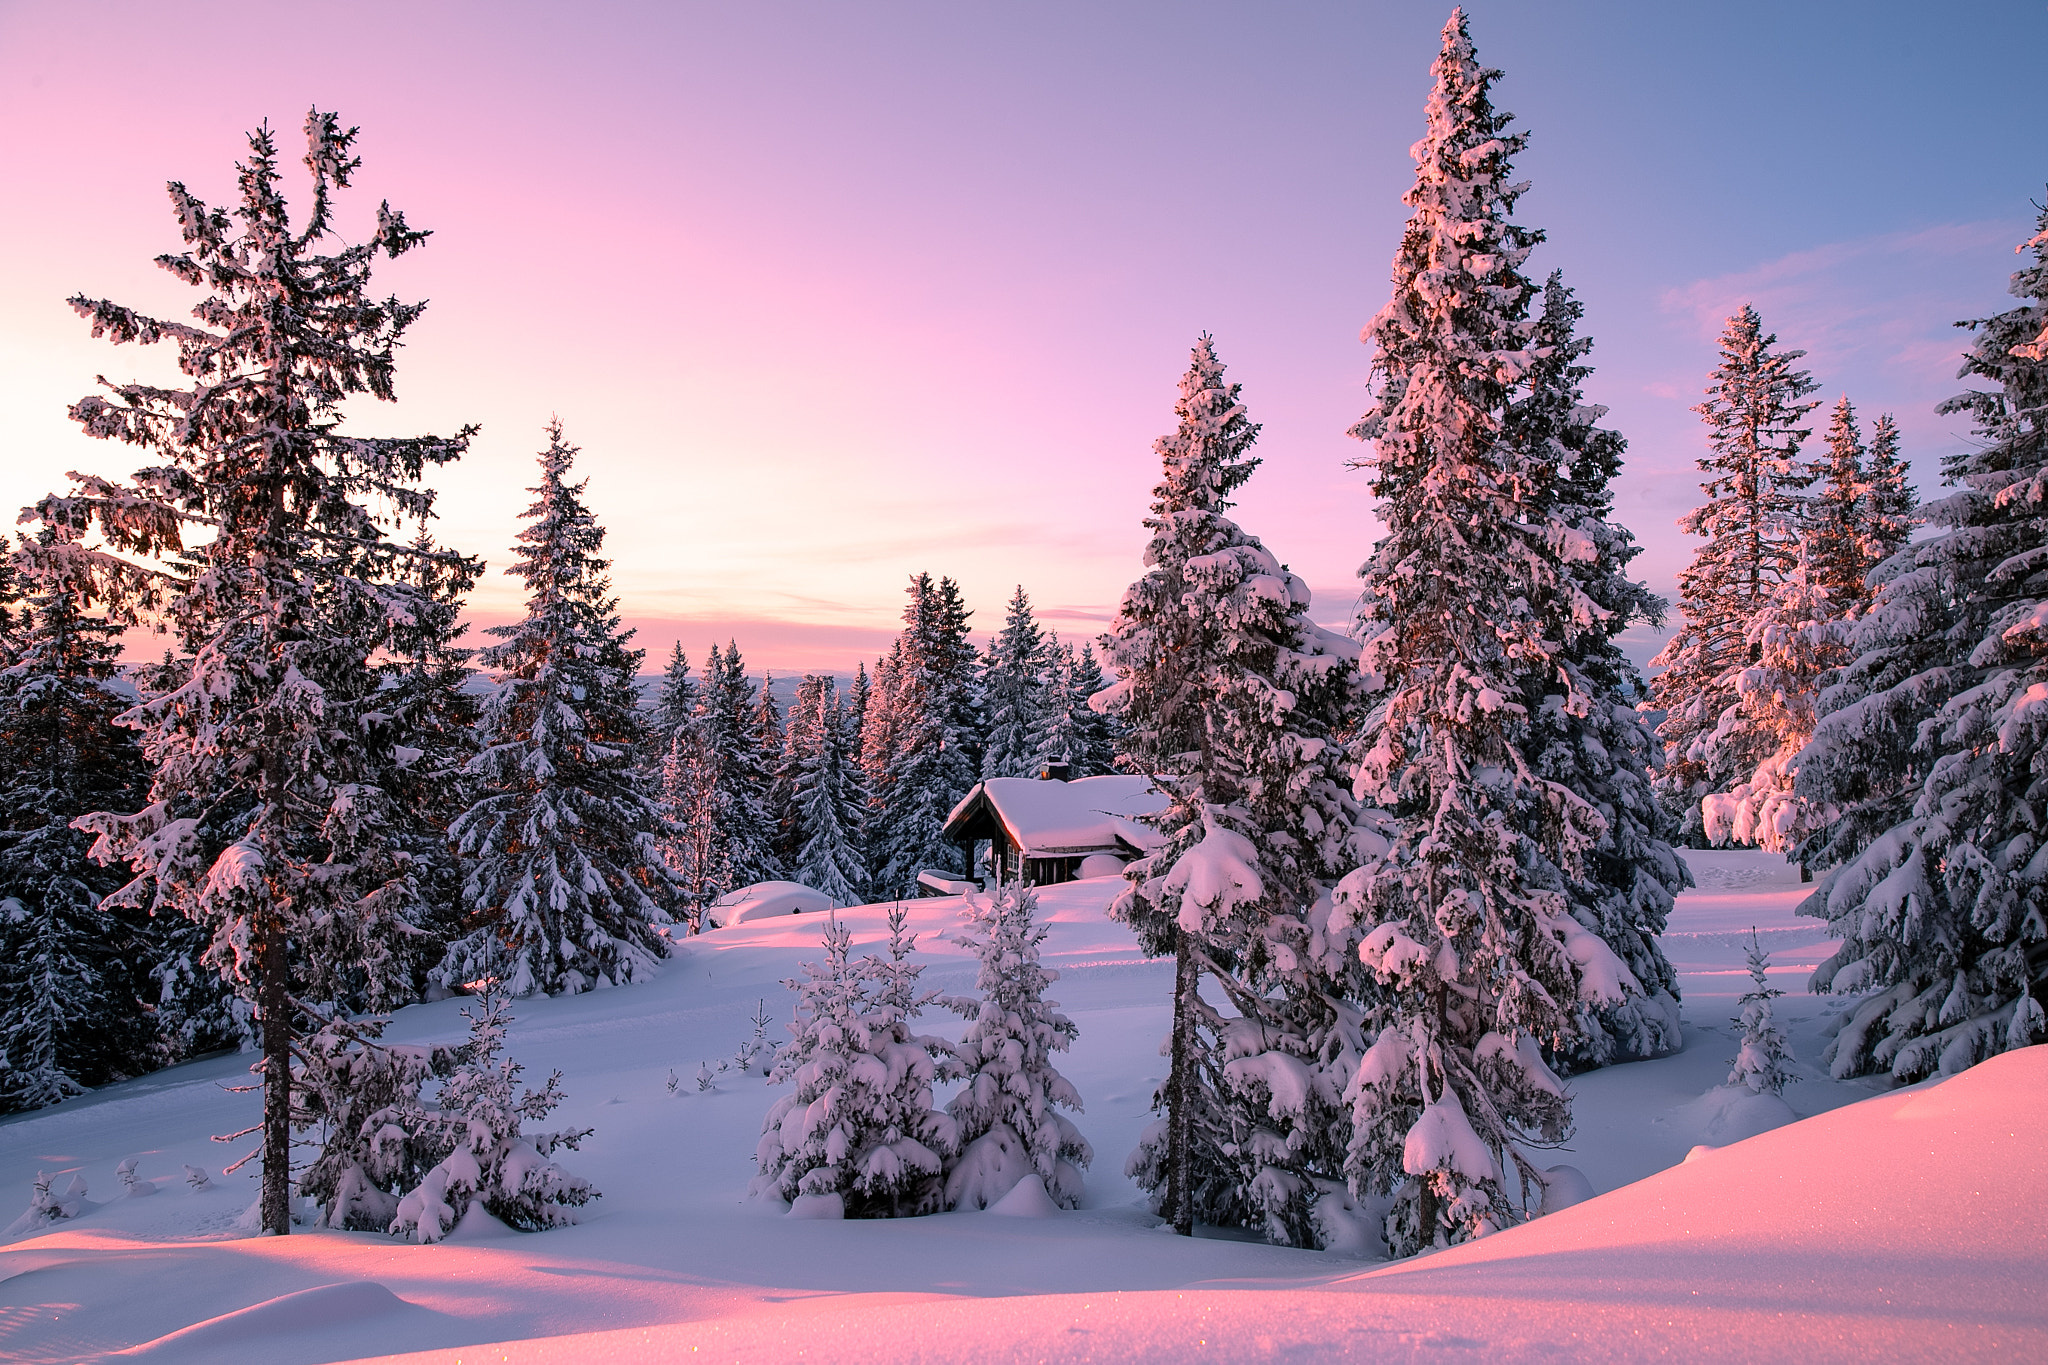 General 2048x1365 nature winter sunset snow trees sky sunset glow